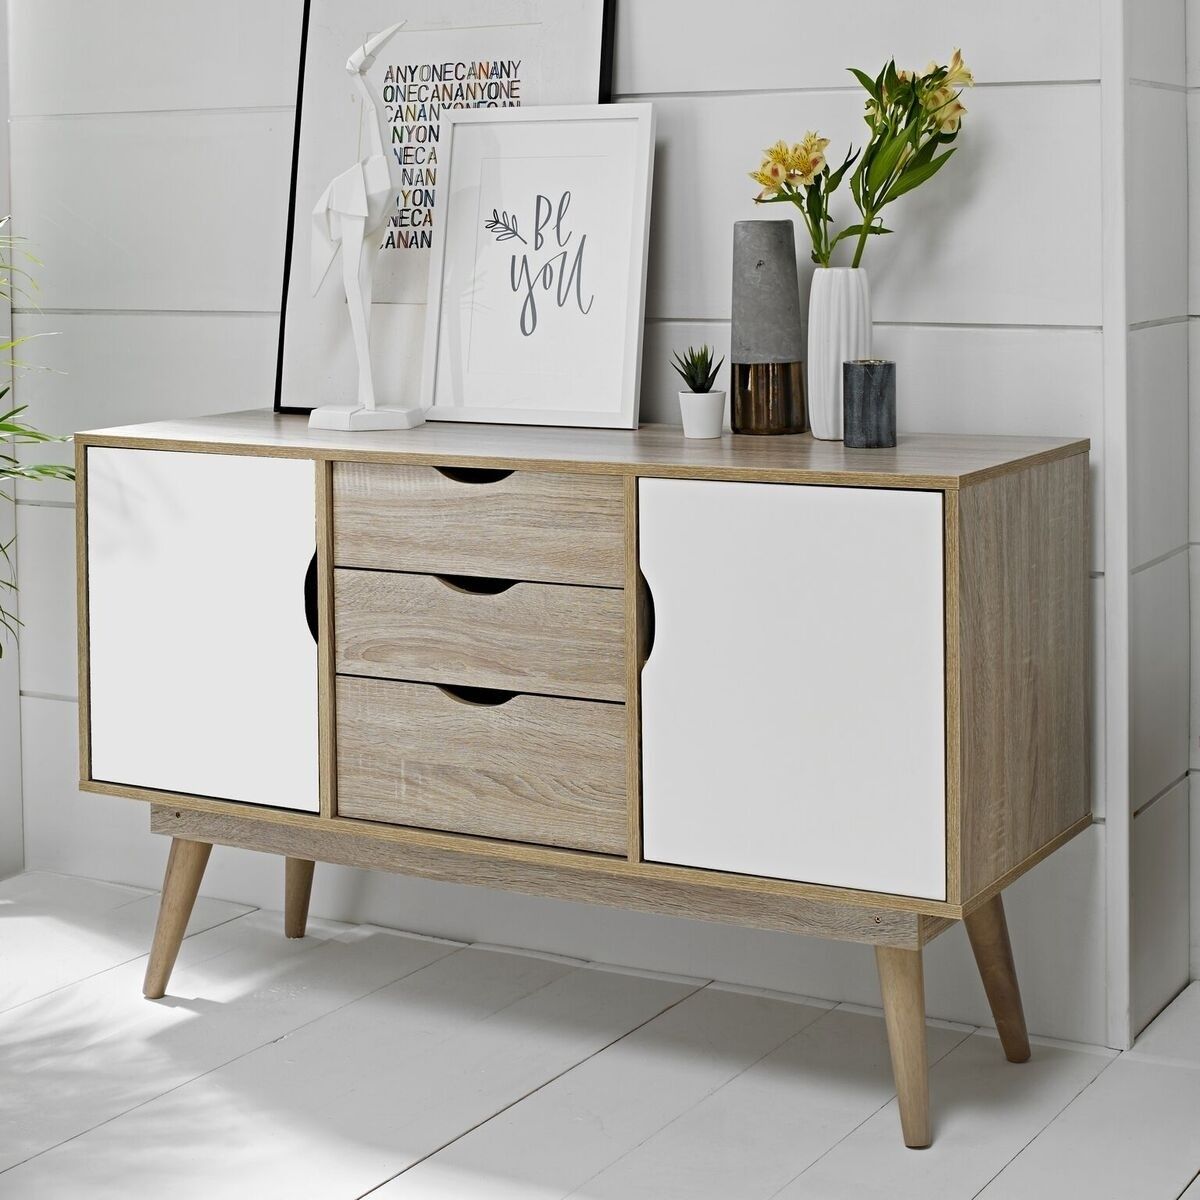 Lpd Scandi 2 Door 3 Drawer Oak Sideboard – White Or Grey Throughout White And Grey Sideboards (View 11 of 30)